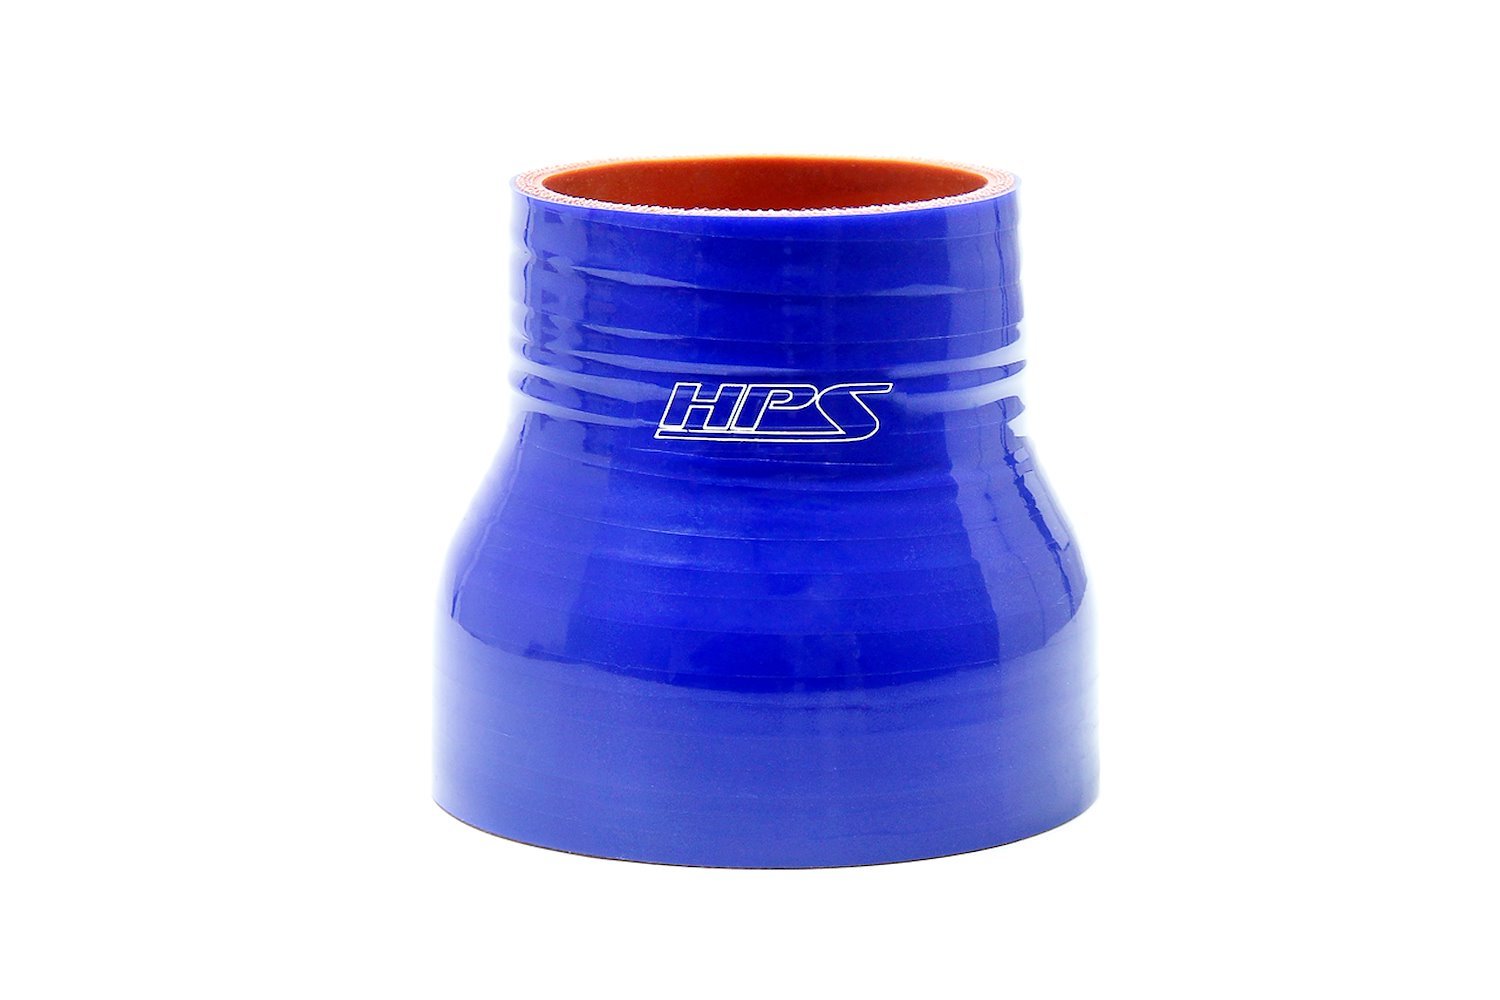 HTSR-225-238-L4-BLUE Silicone Reducer Hose, High-Temp 4-Ply Reinforced, 2-1/4 in. - 2-3/8 in. ID, 4 in. Long, Blue